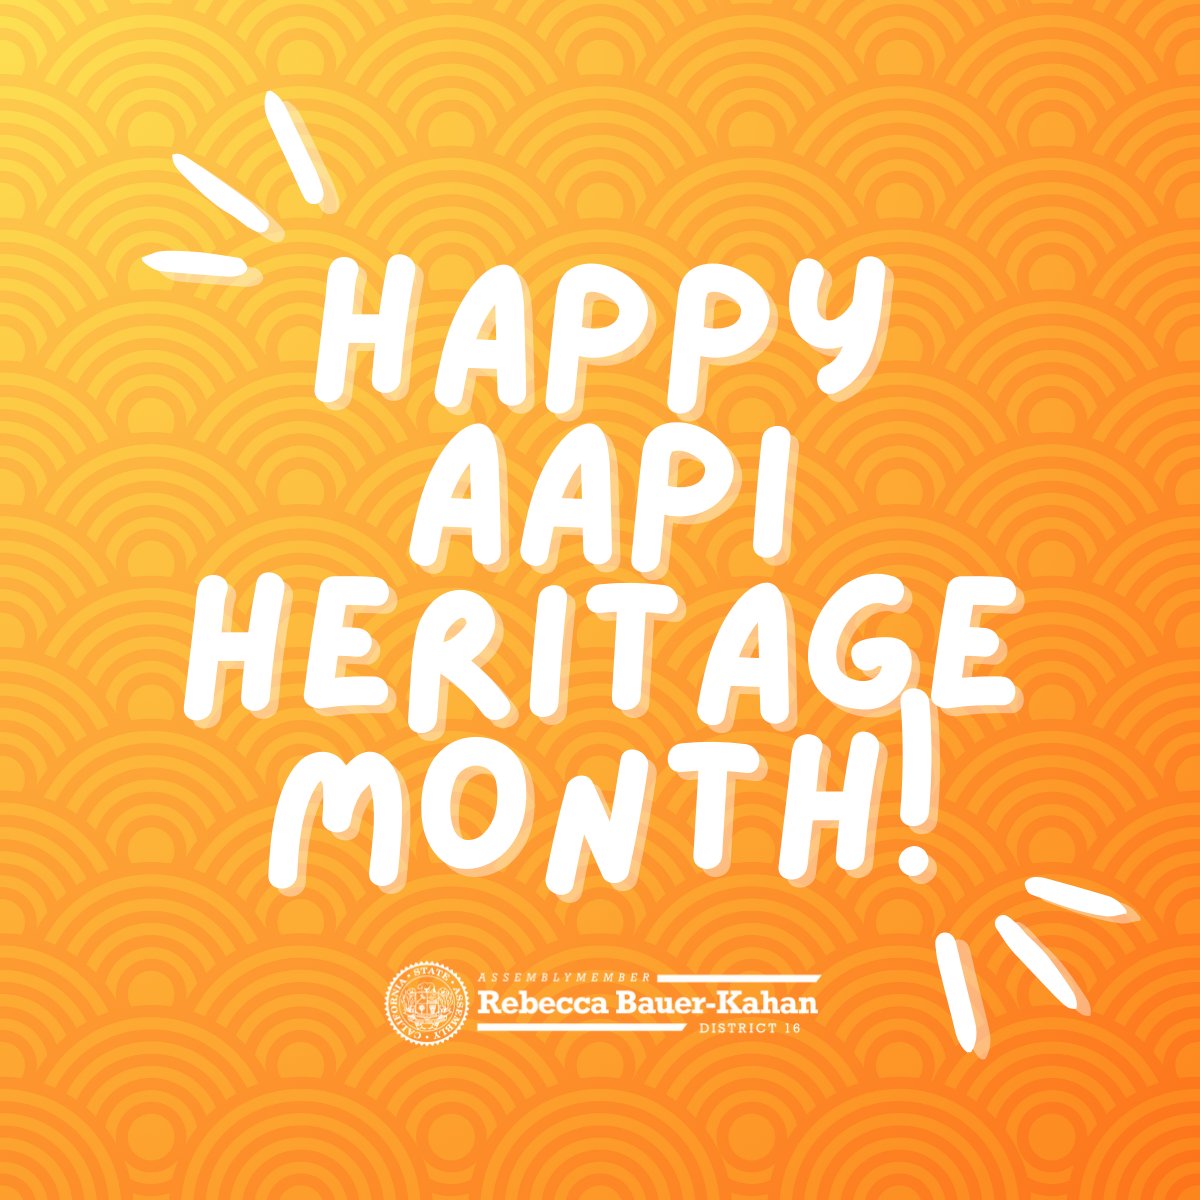 Happy AAPI Heritage Month! Let's celebrate the culture and history of California's diverse AAPI communities and stand united against hate. #AAPIHeritageMonth